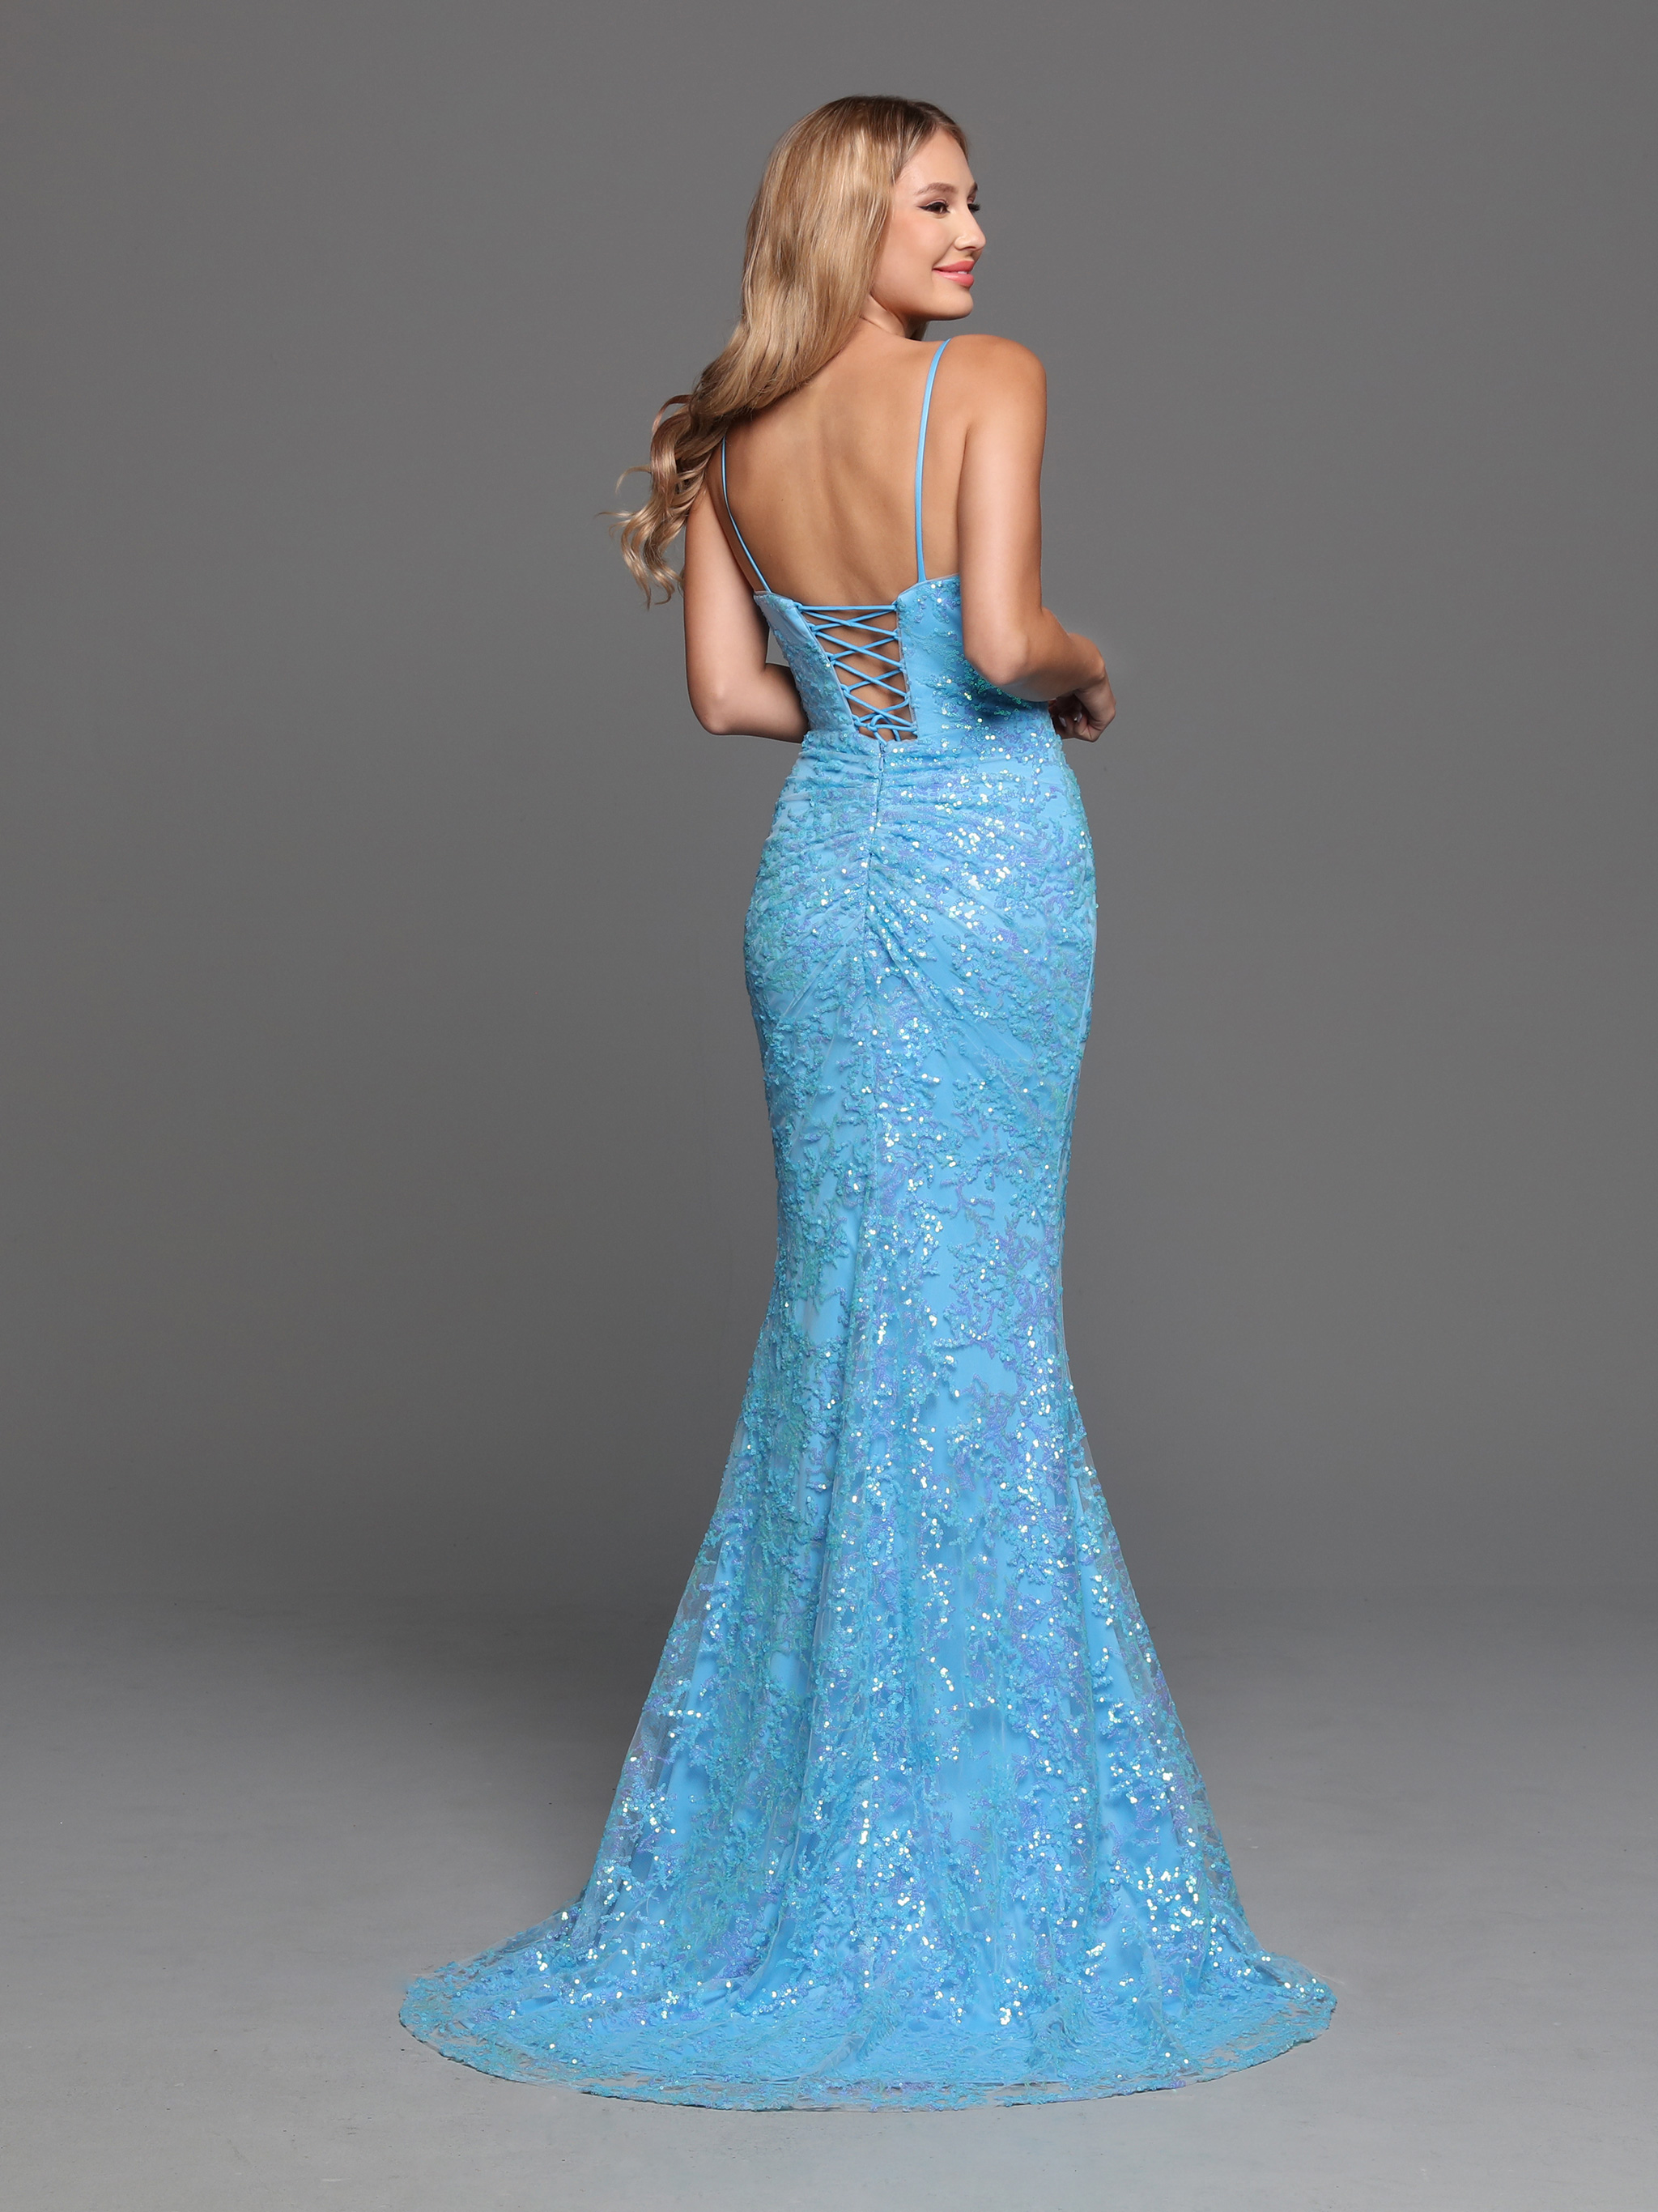 Image showing back view of style #72246